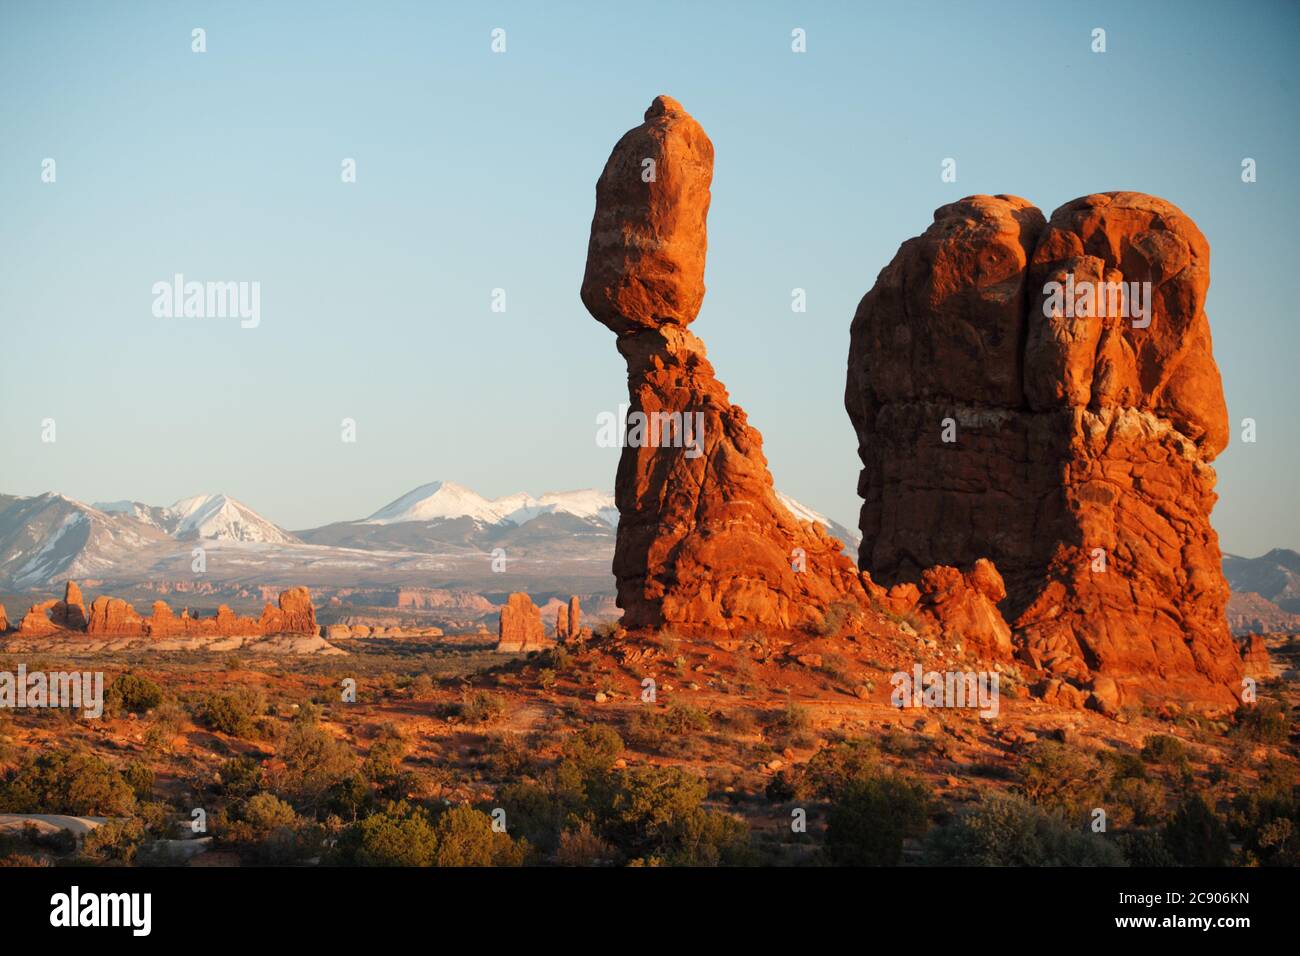 The balanced rock sandstone formation in Arches National Park, in southern Utah near Moab. Stock Photo